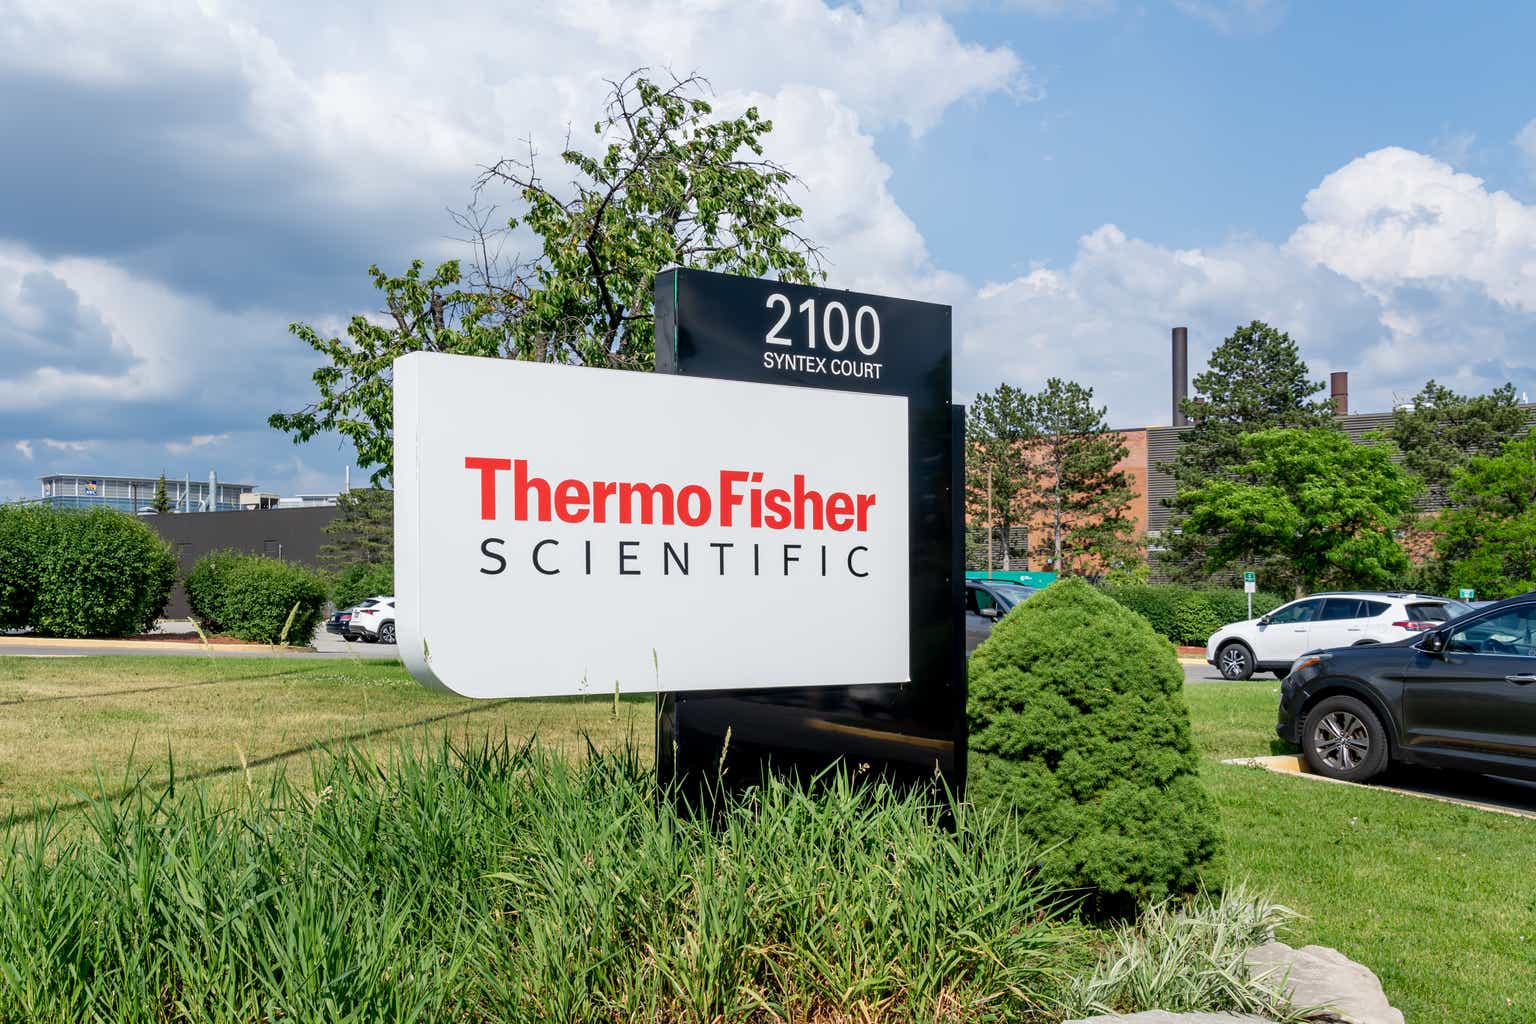 Buy Thermo Fisher, But With Caution